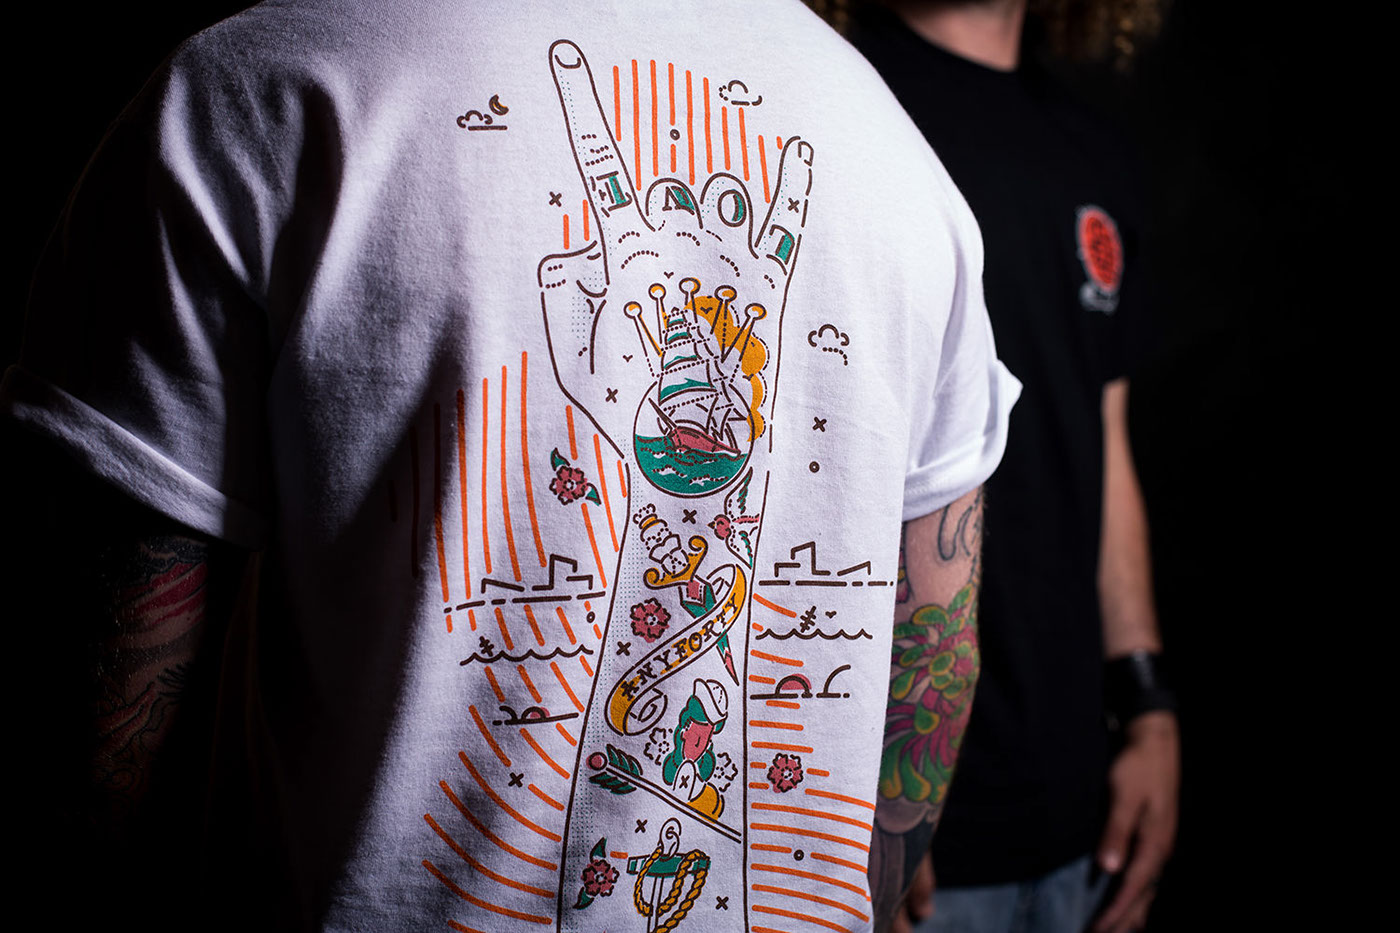 Anyforty artisourweapon Clothing streetwear colour and lines badge family t-shirt james oconnell manchester